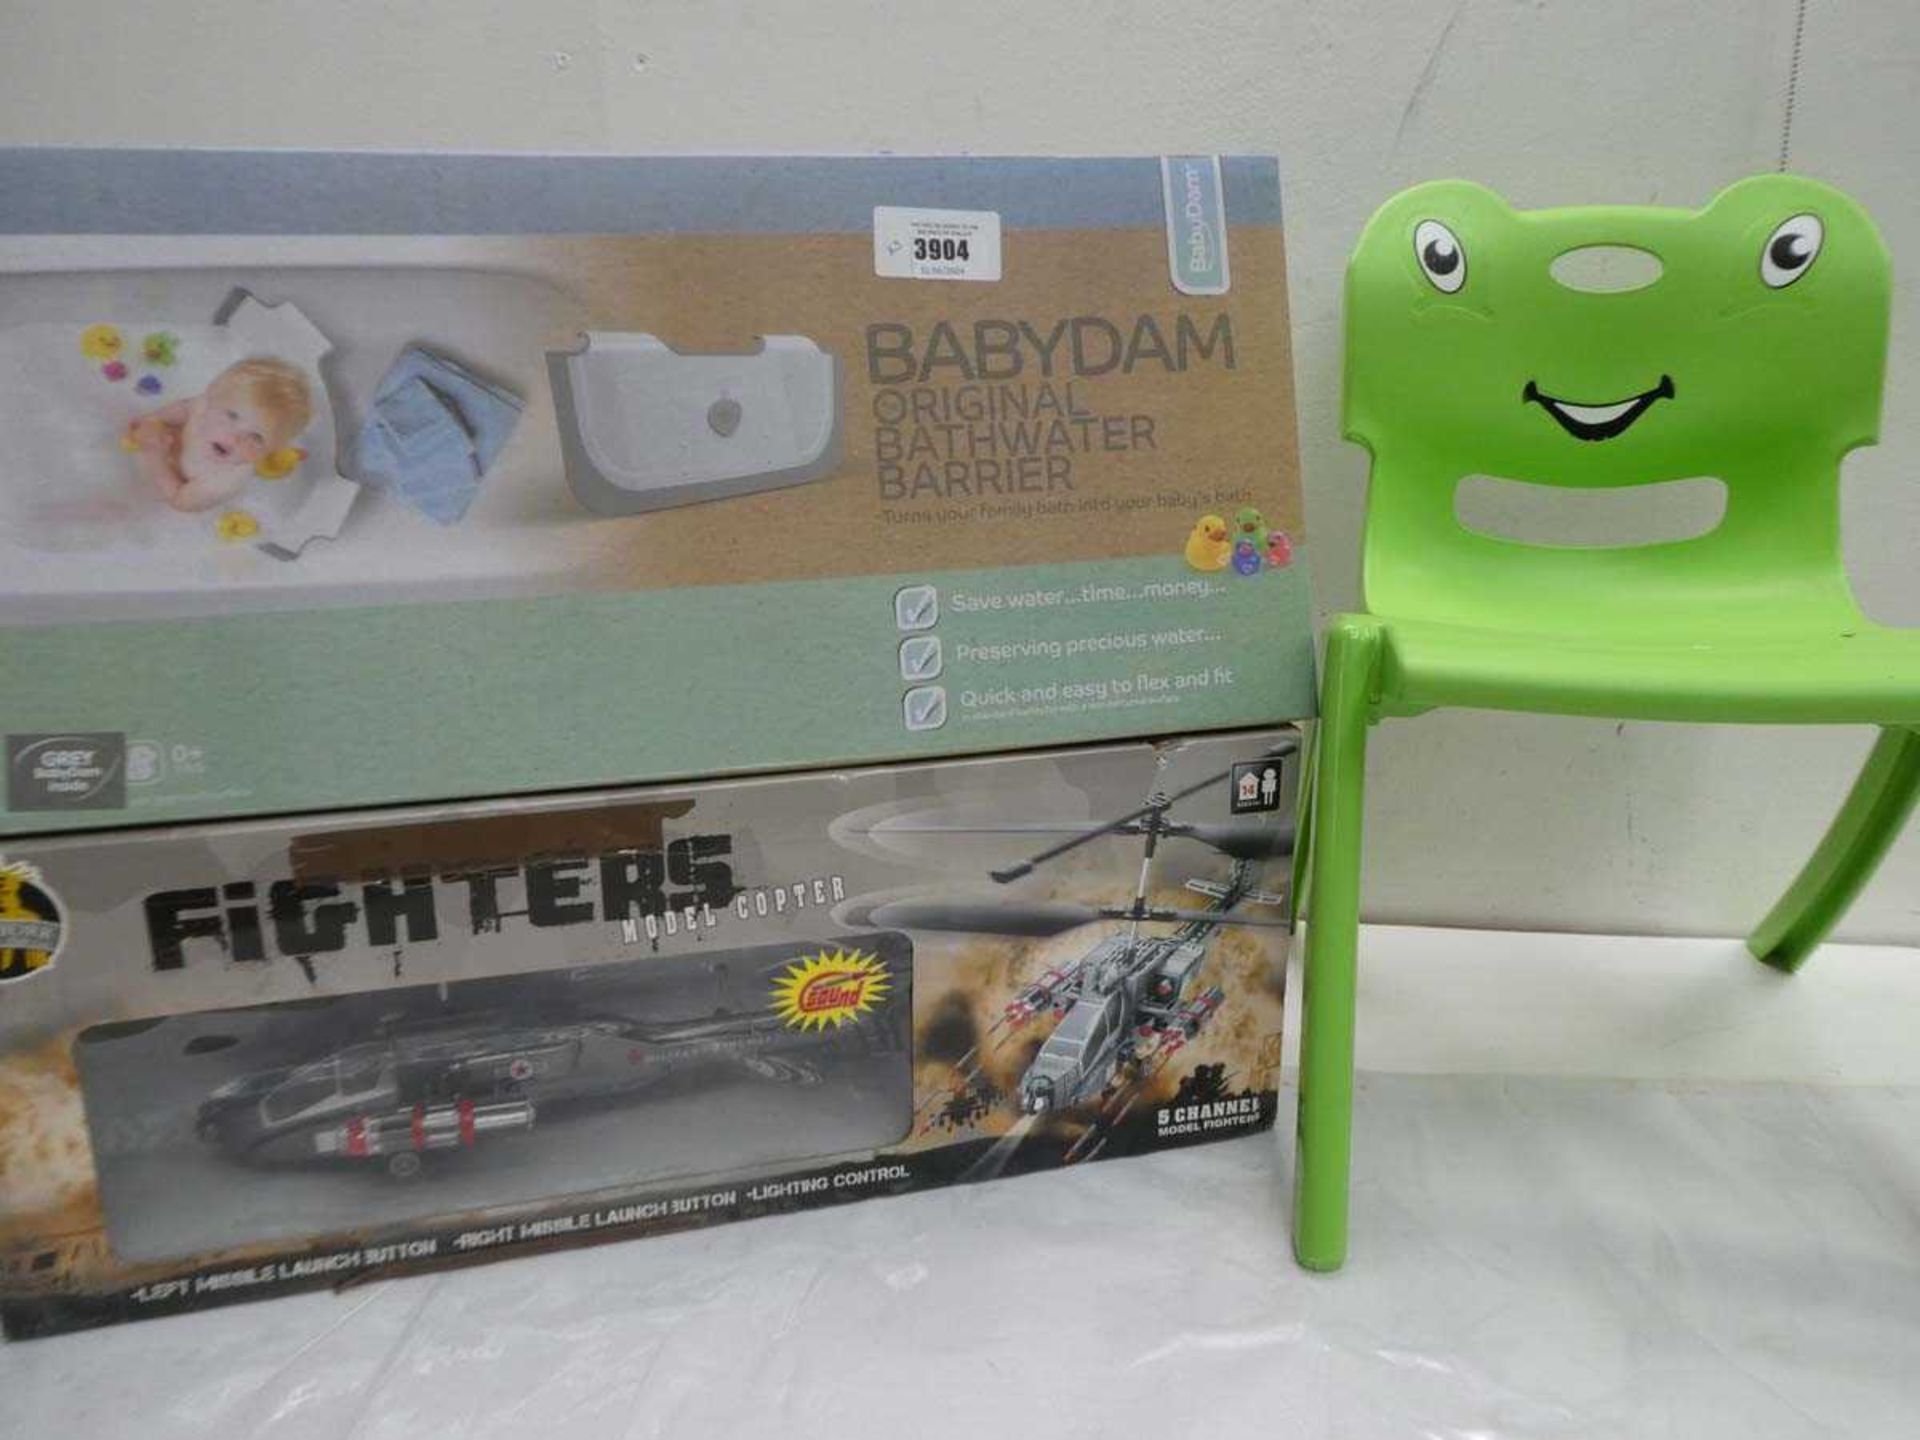 +VAT Fighter model copter, Babydam bathwater barrier and child's chair